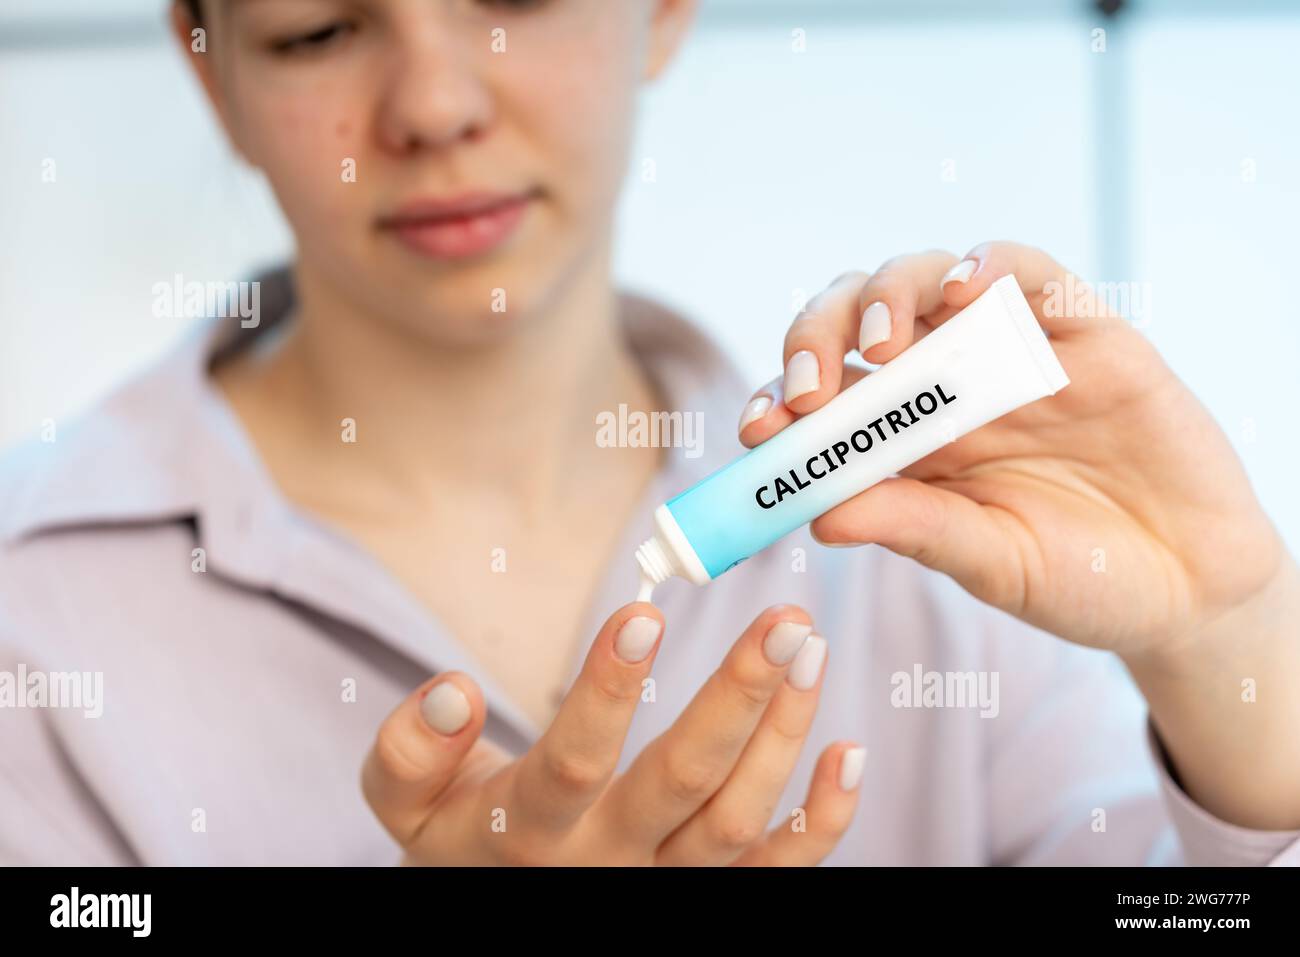 Calcipotriol: A synthetic form of vitamin D used in cream form to treat psoriasis by slowing down the growth of skin cells. Stock Photo